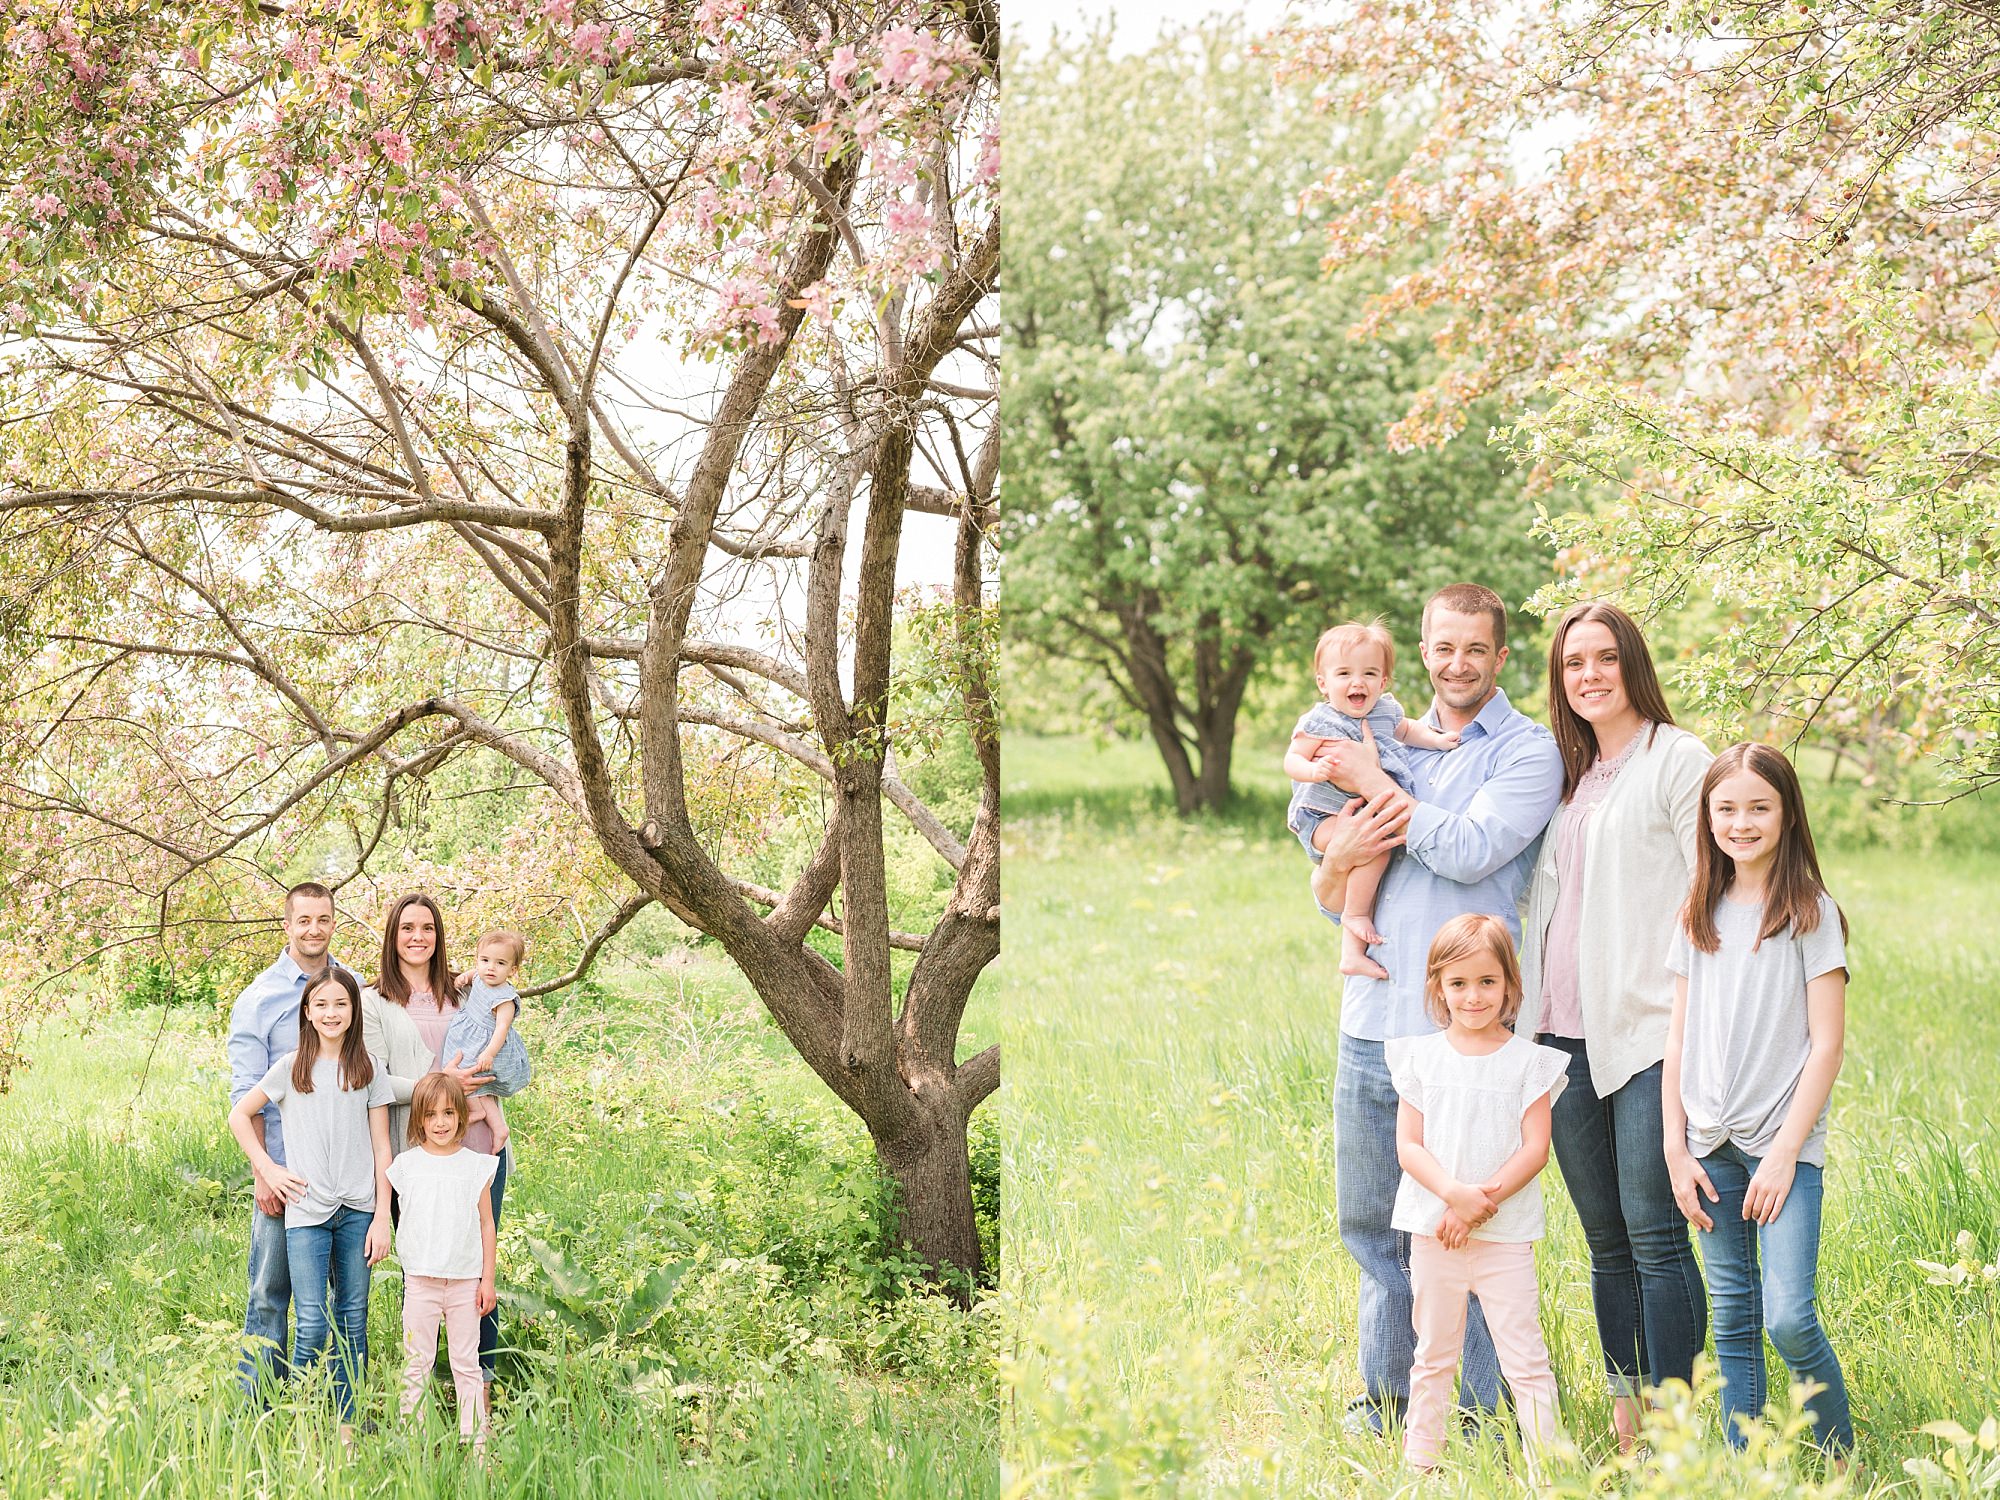 A Family of five smile while surrounded by spring blooms